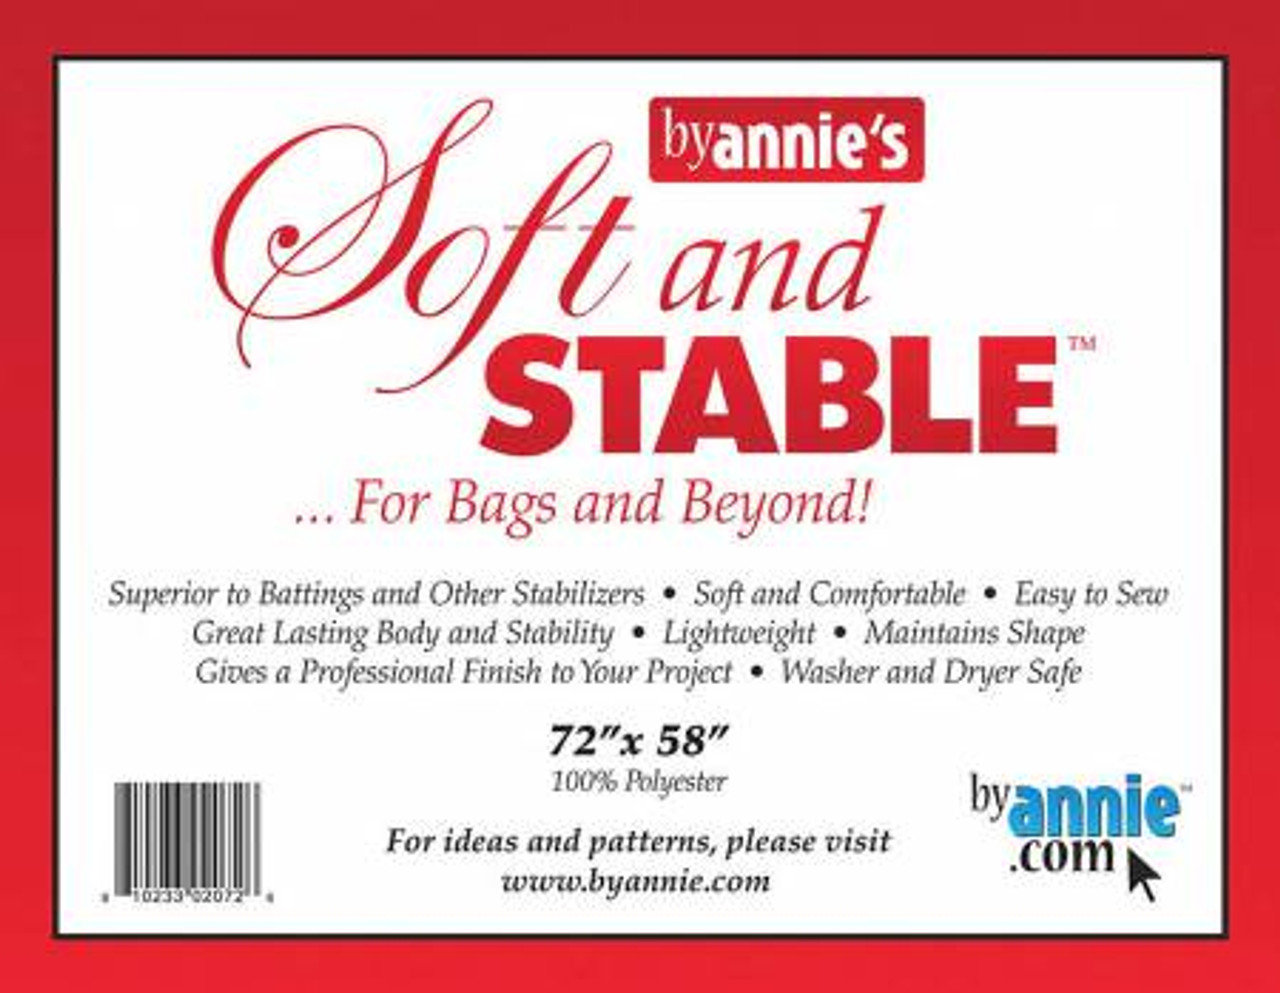 ByAnnie's Soft and Stable